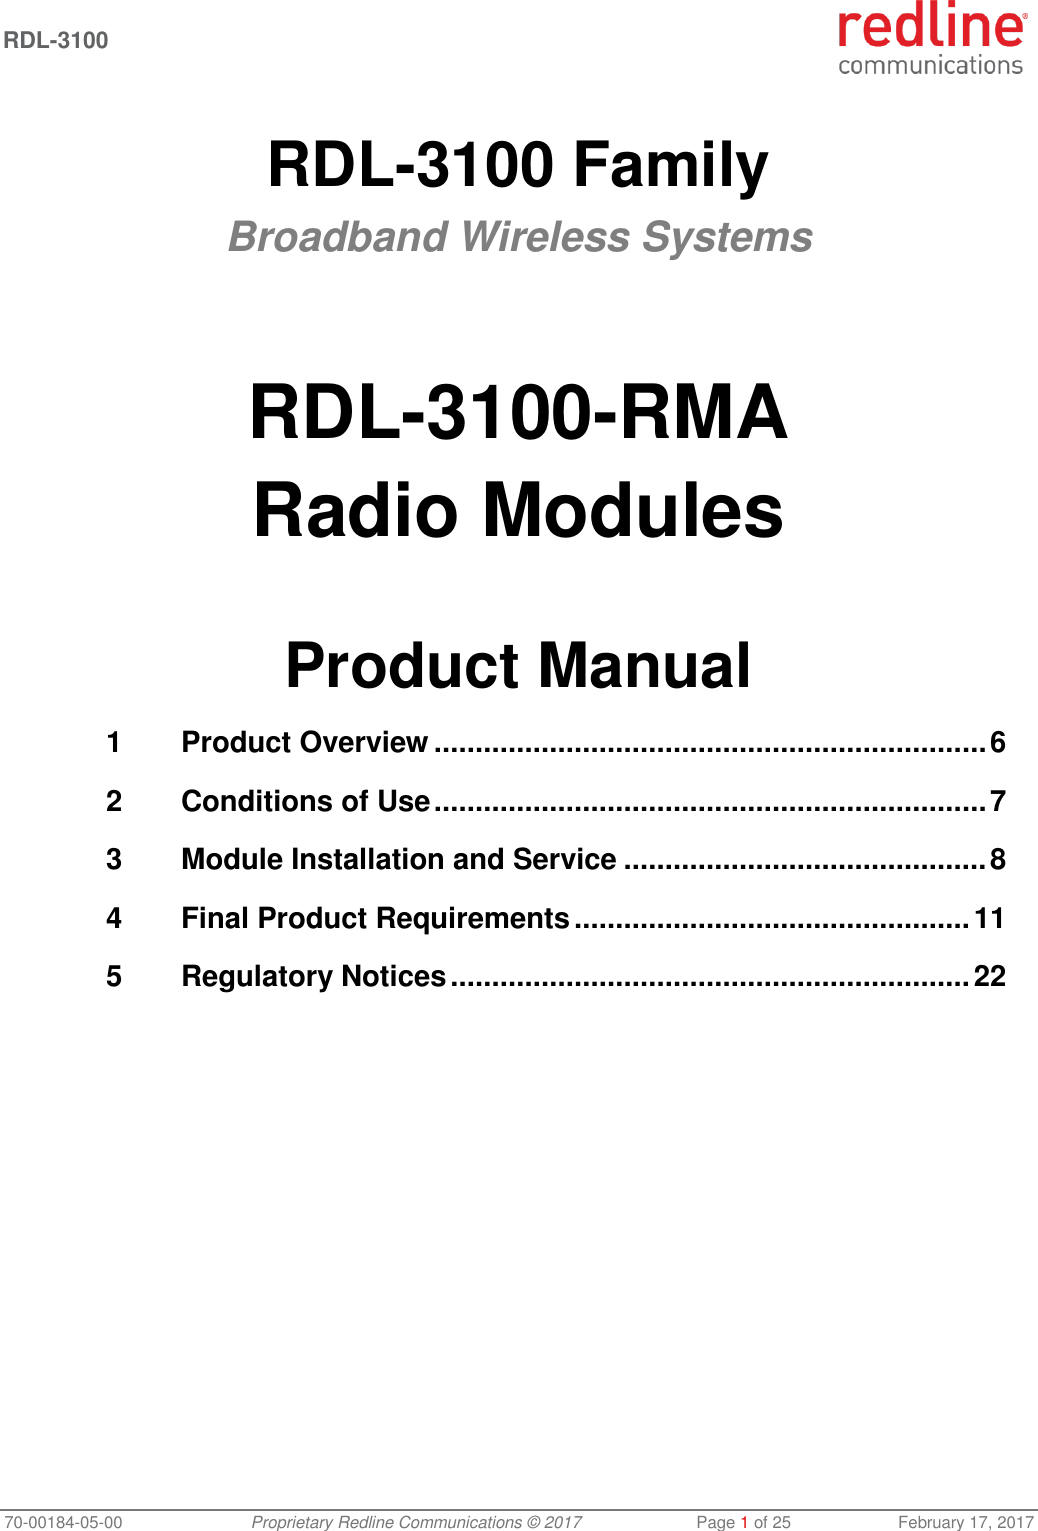  RDL-3100   70-00184-05-00 Proprietary Redline Communications © 2017  Page 1 of 25  February 17, 2017  RDL-3100 Family Broadband Wireless Systems    RDL-3100-RMA Radio Modules   Product Manual 1 Product Overview ................................................................... 6 2 Conditions of Use ................................................................... 7 3 Module Installation and Service ............................................ 8 4 Final Product Requirements ................................................ 11 5 Regulatory Notices ............................................................... 22 